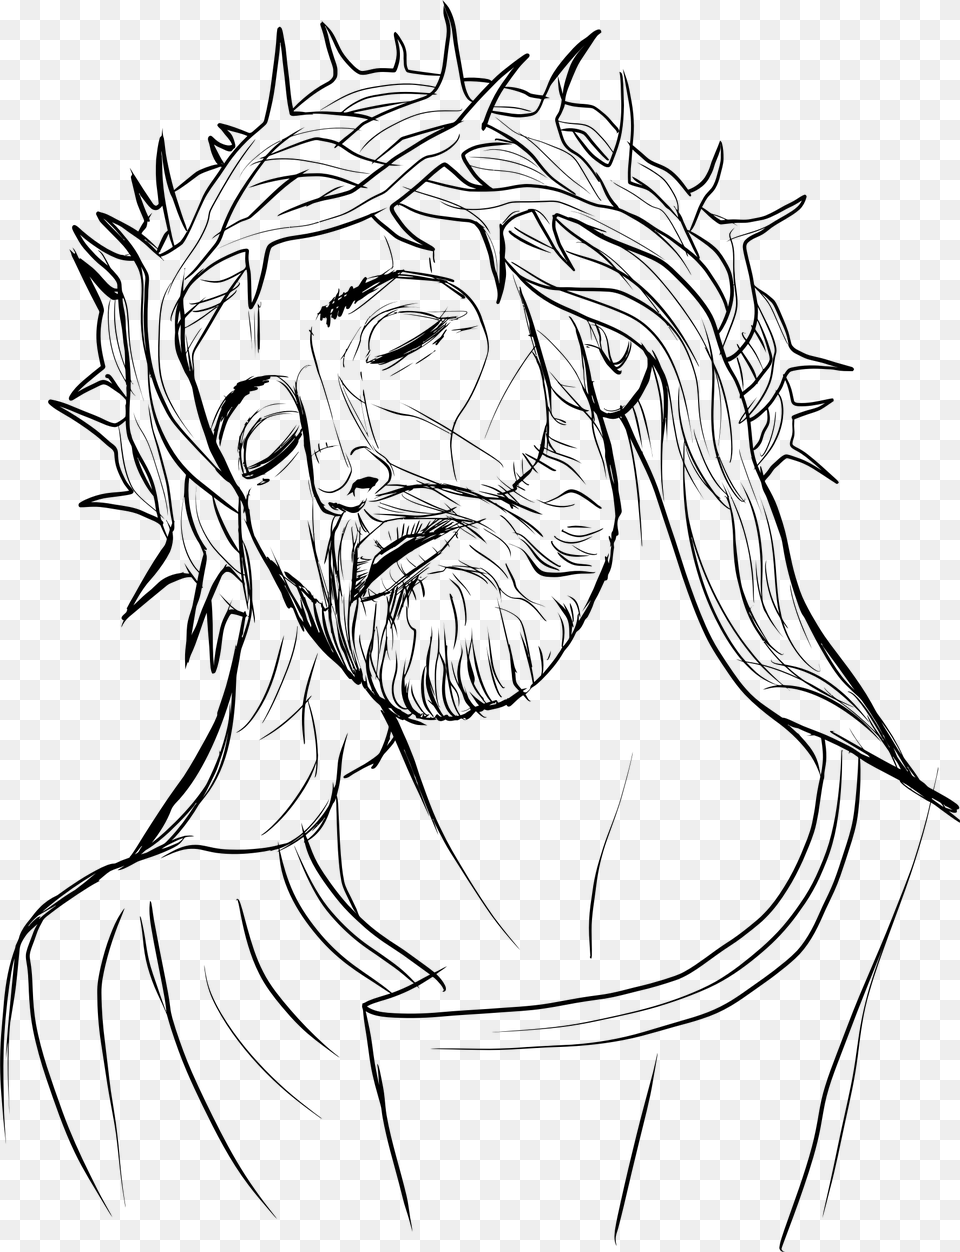 Jesus Crown Of Thorns Illustration Vector Royalty Free Jesus Is Crowned With Thorns Drawing, Gray Png Image